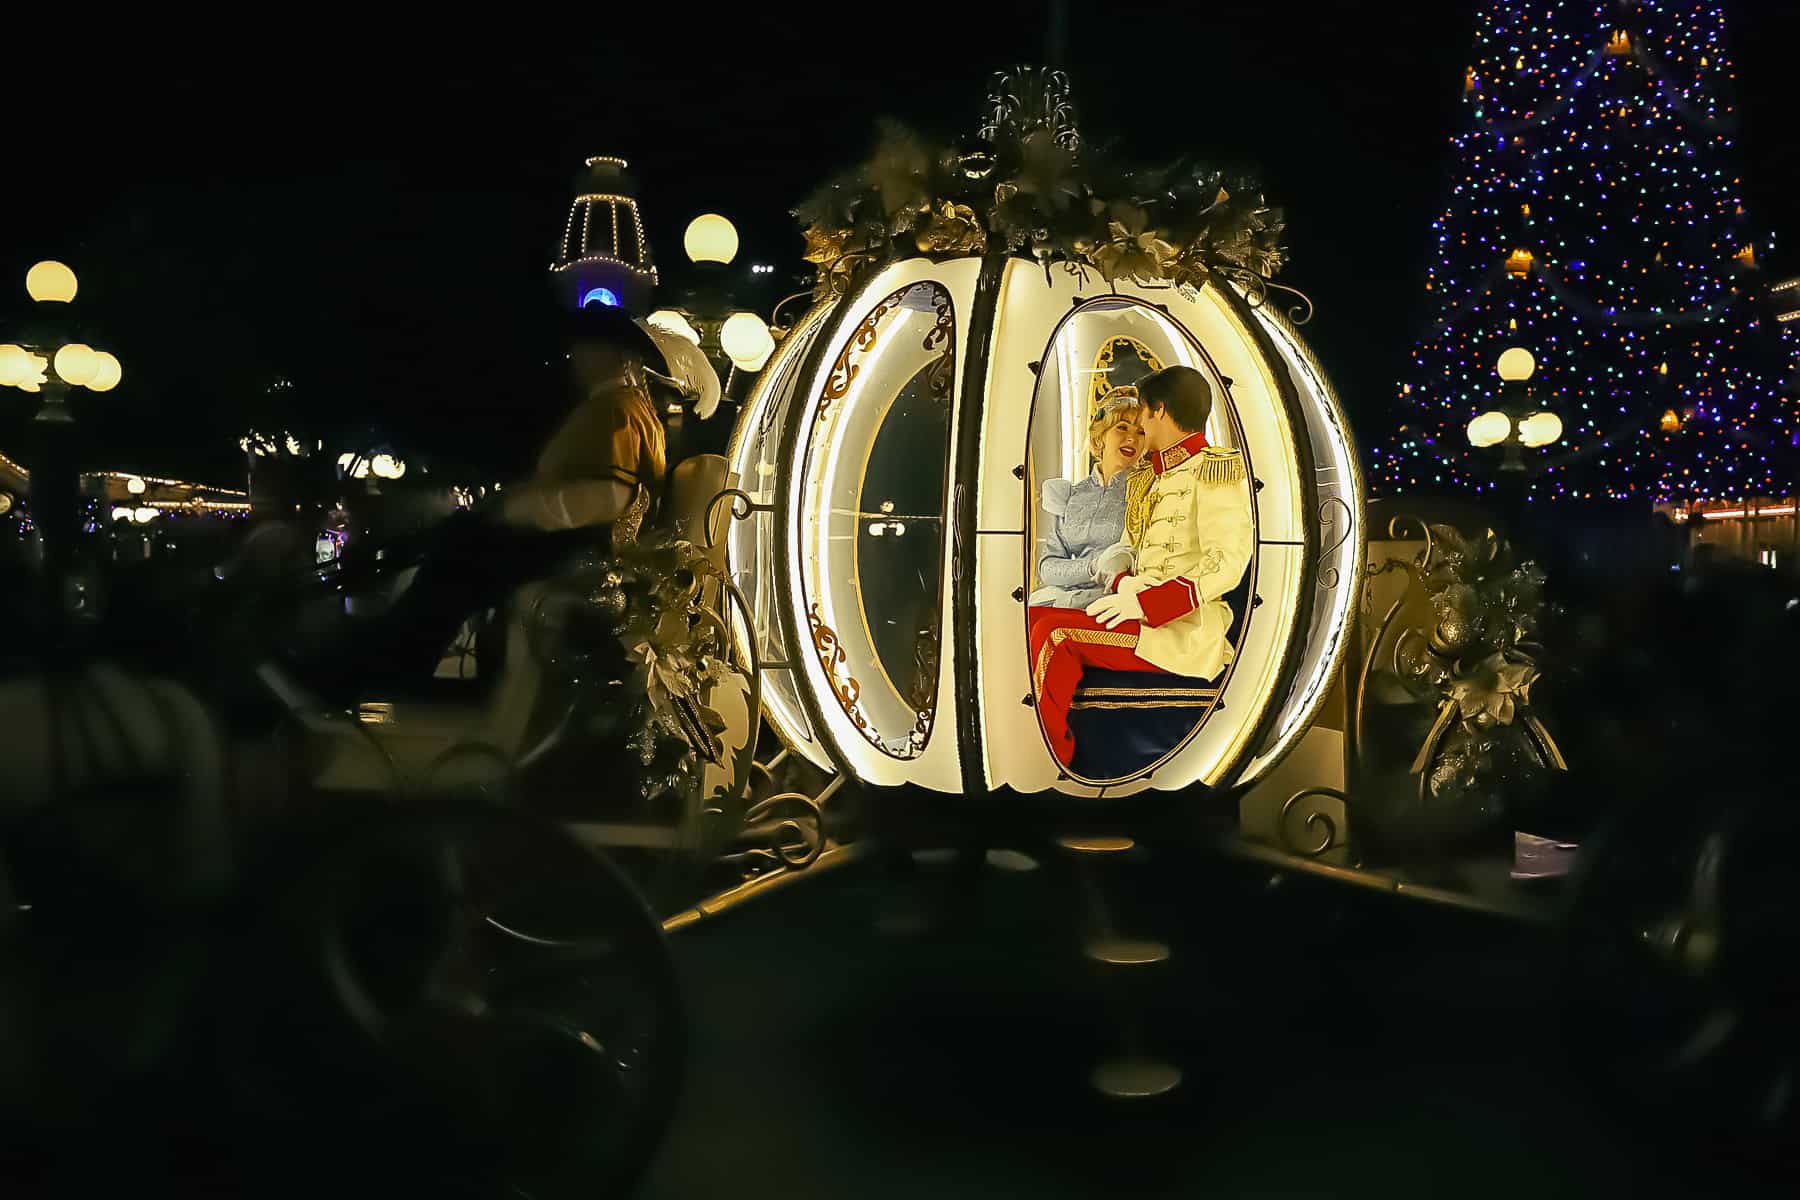 Cinderella and Prince Charming inside her glowing carriage during the Christmas Parade. 